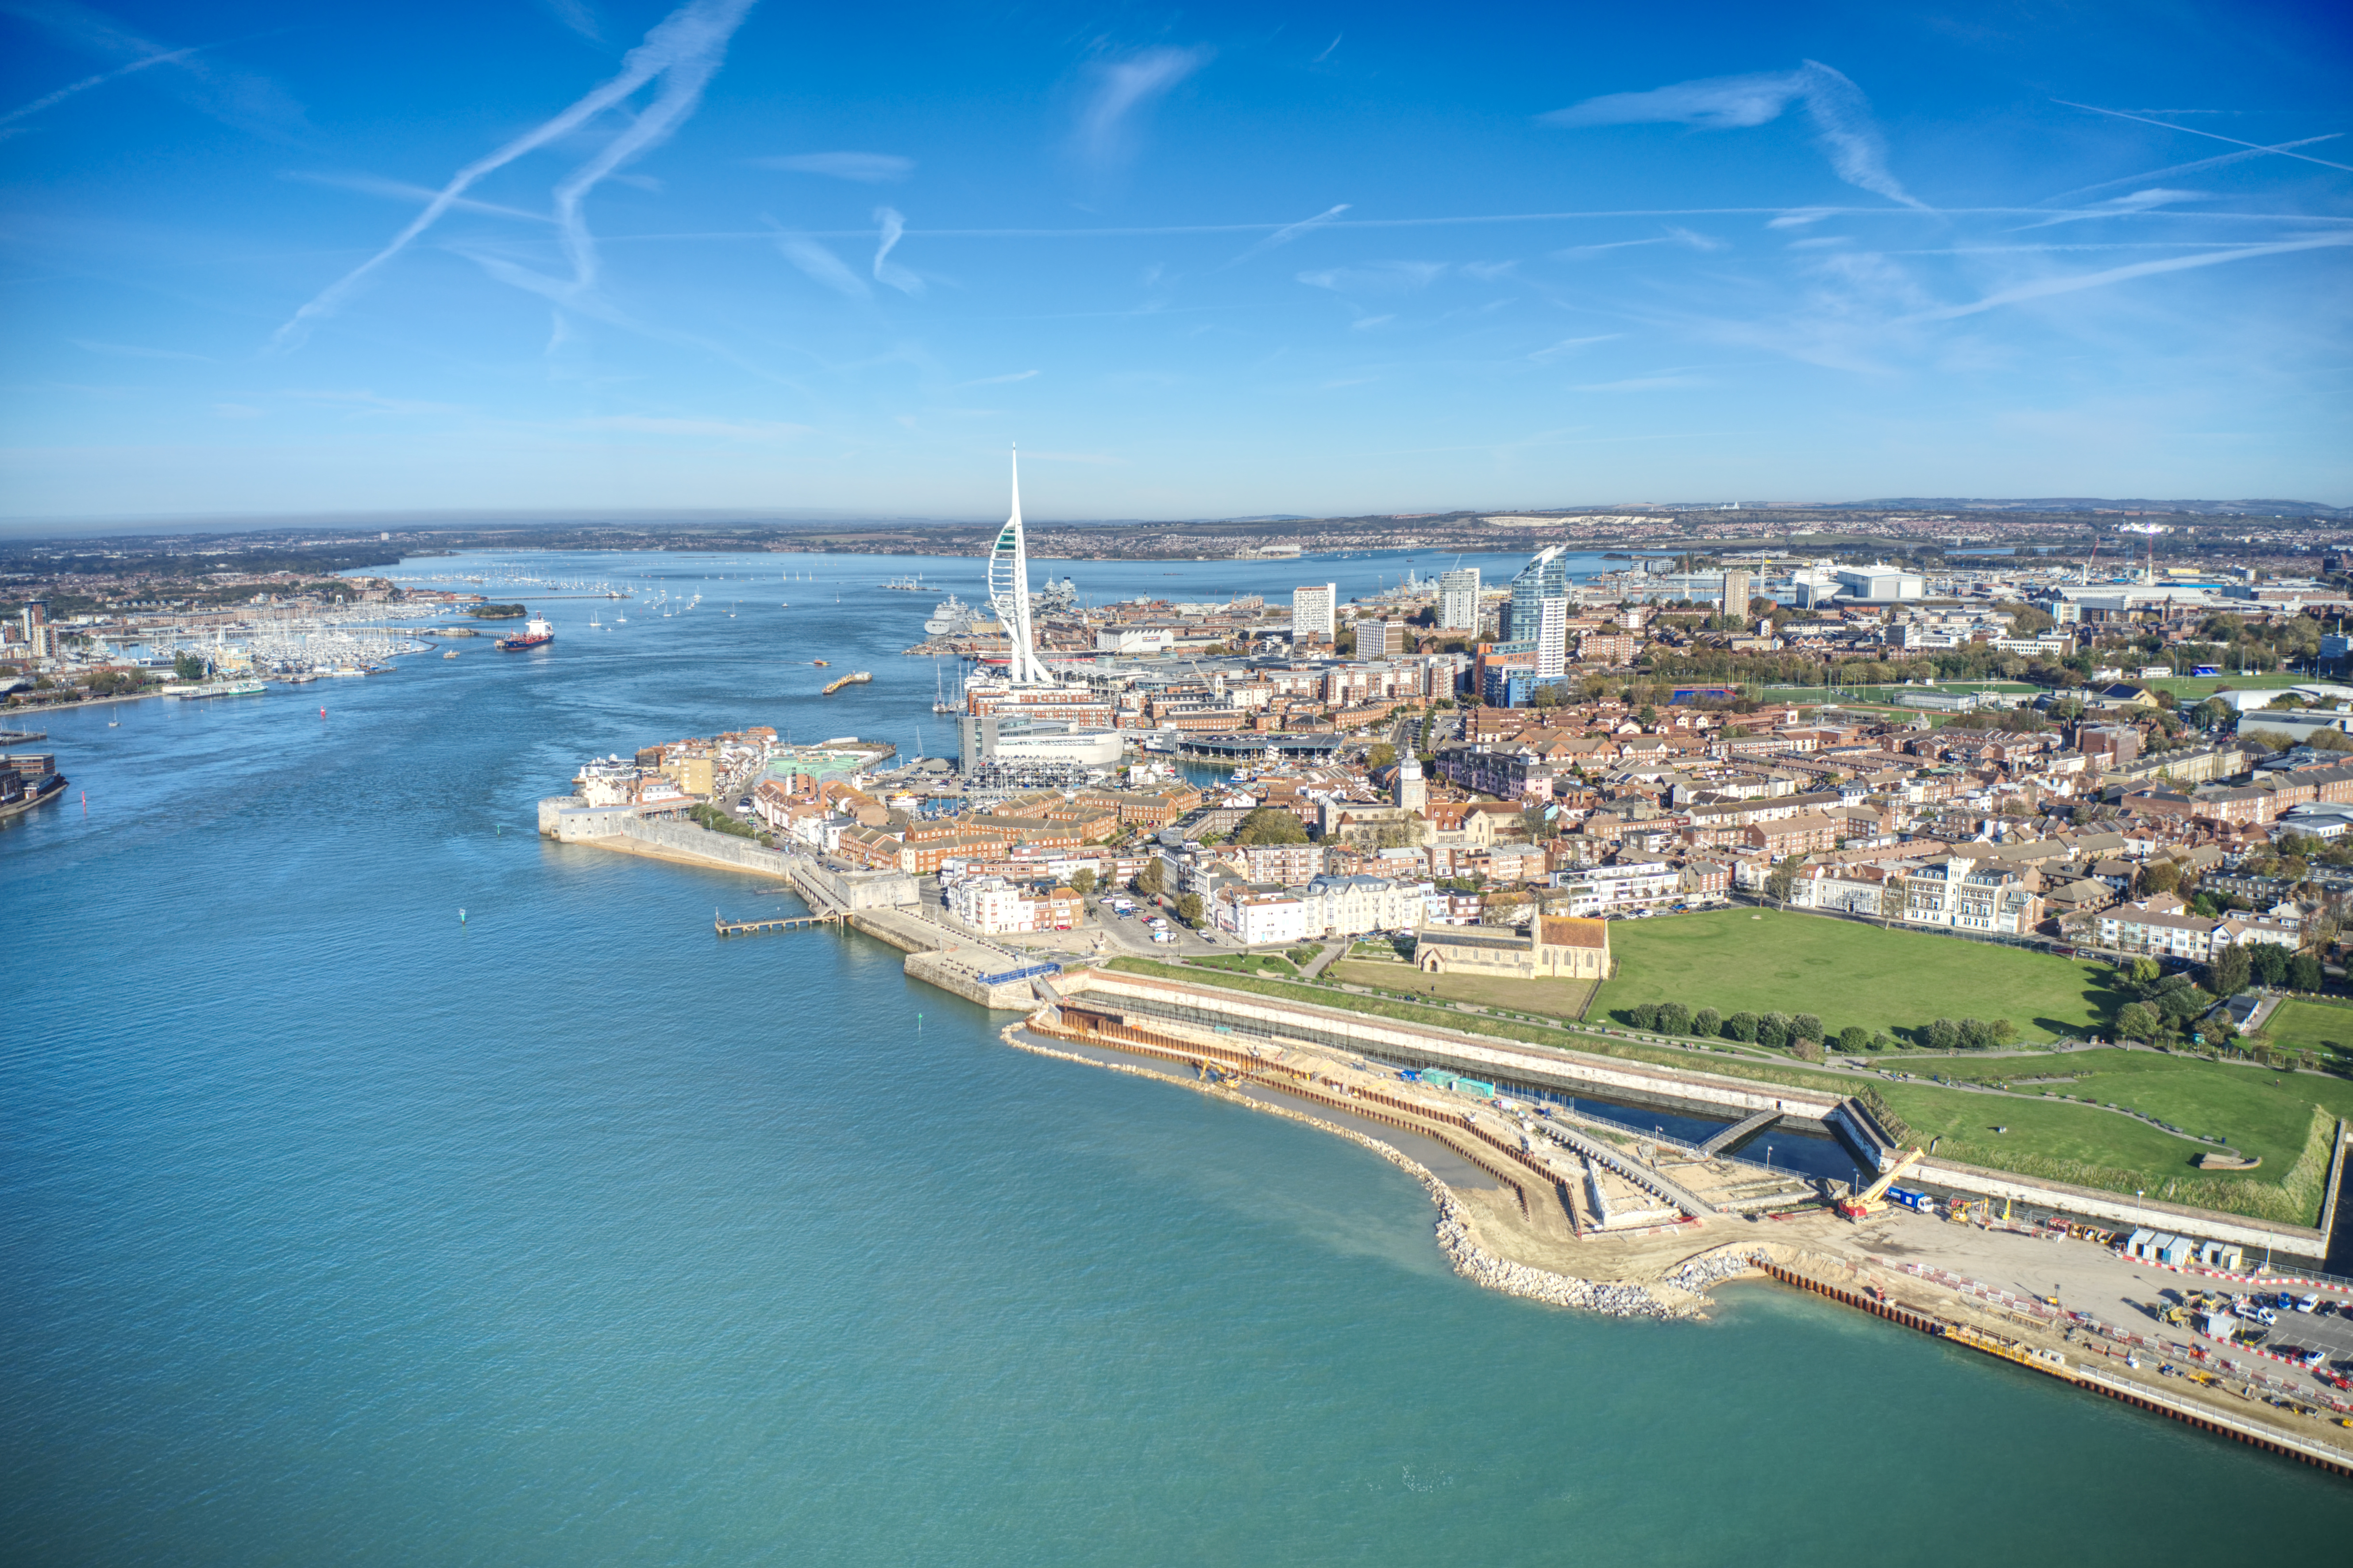 Solent welcomes national voice of the UK’s maritime industries